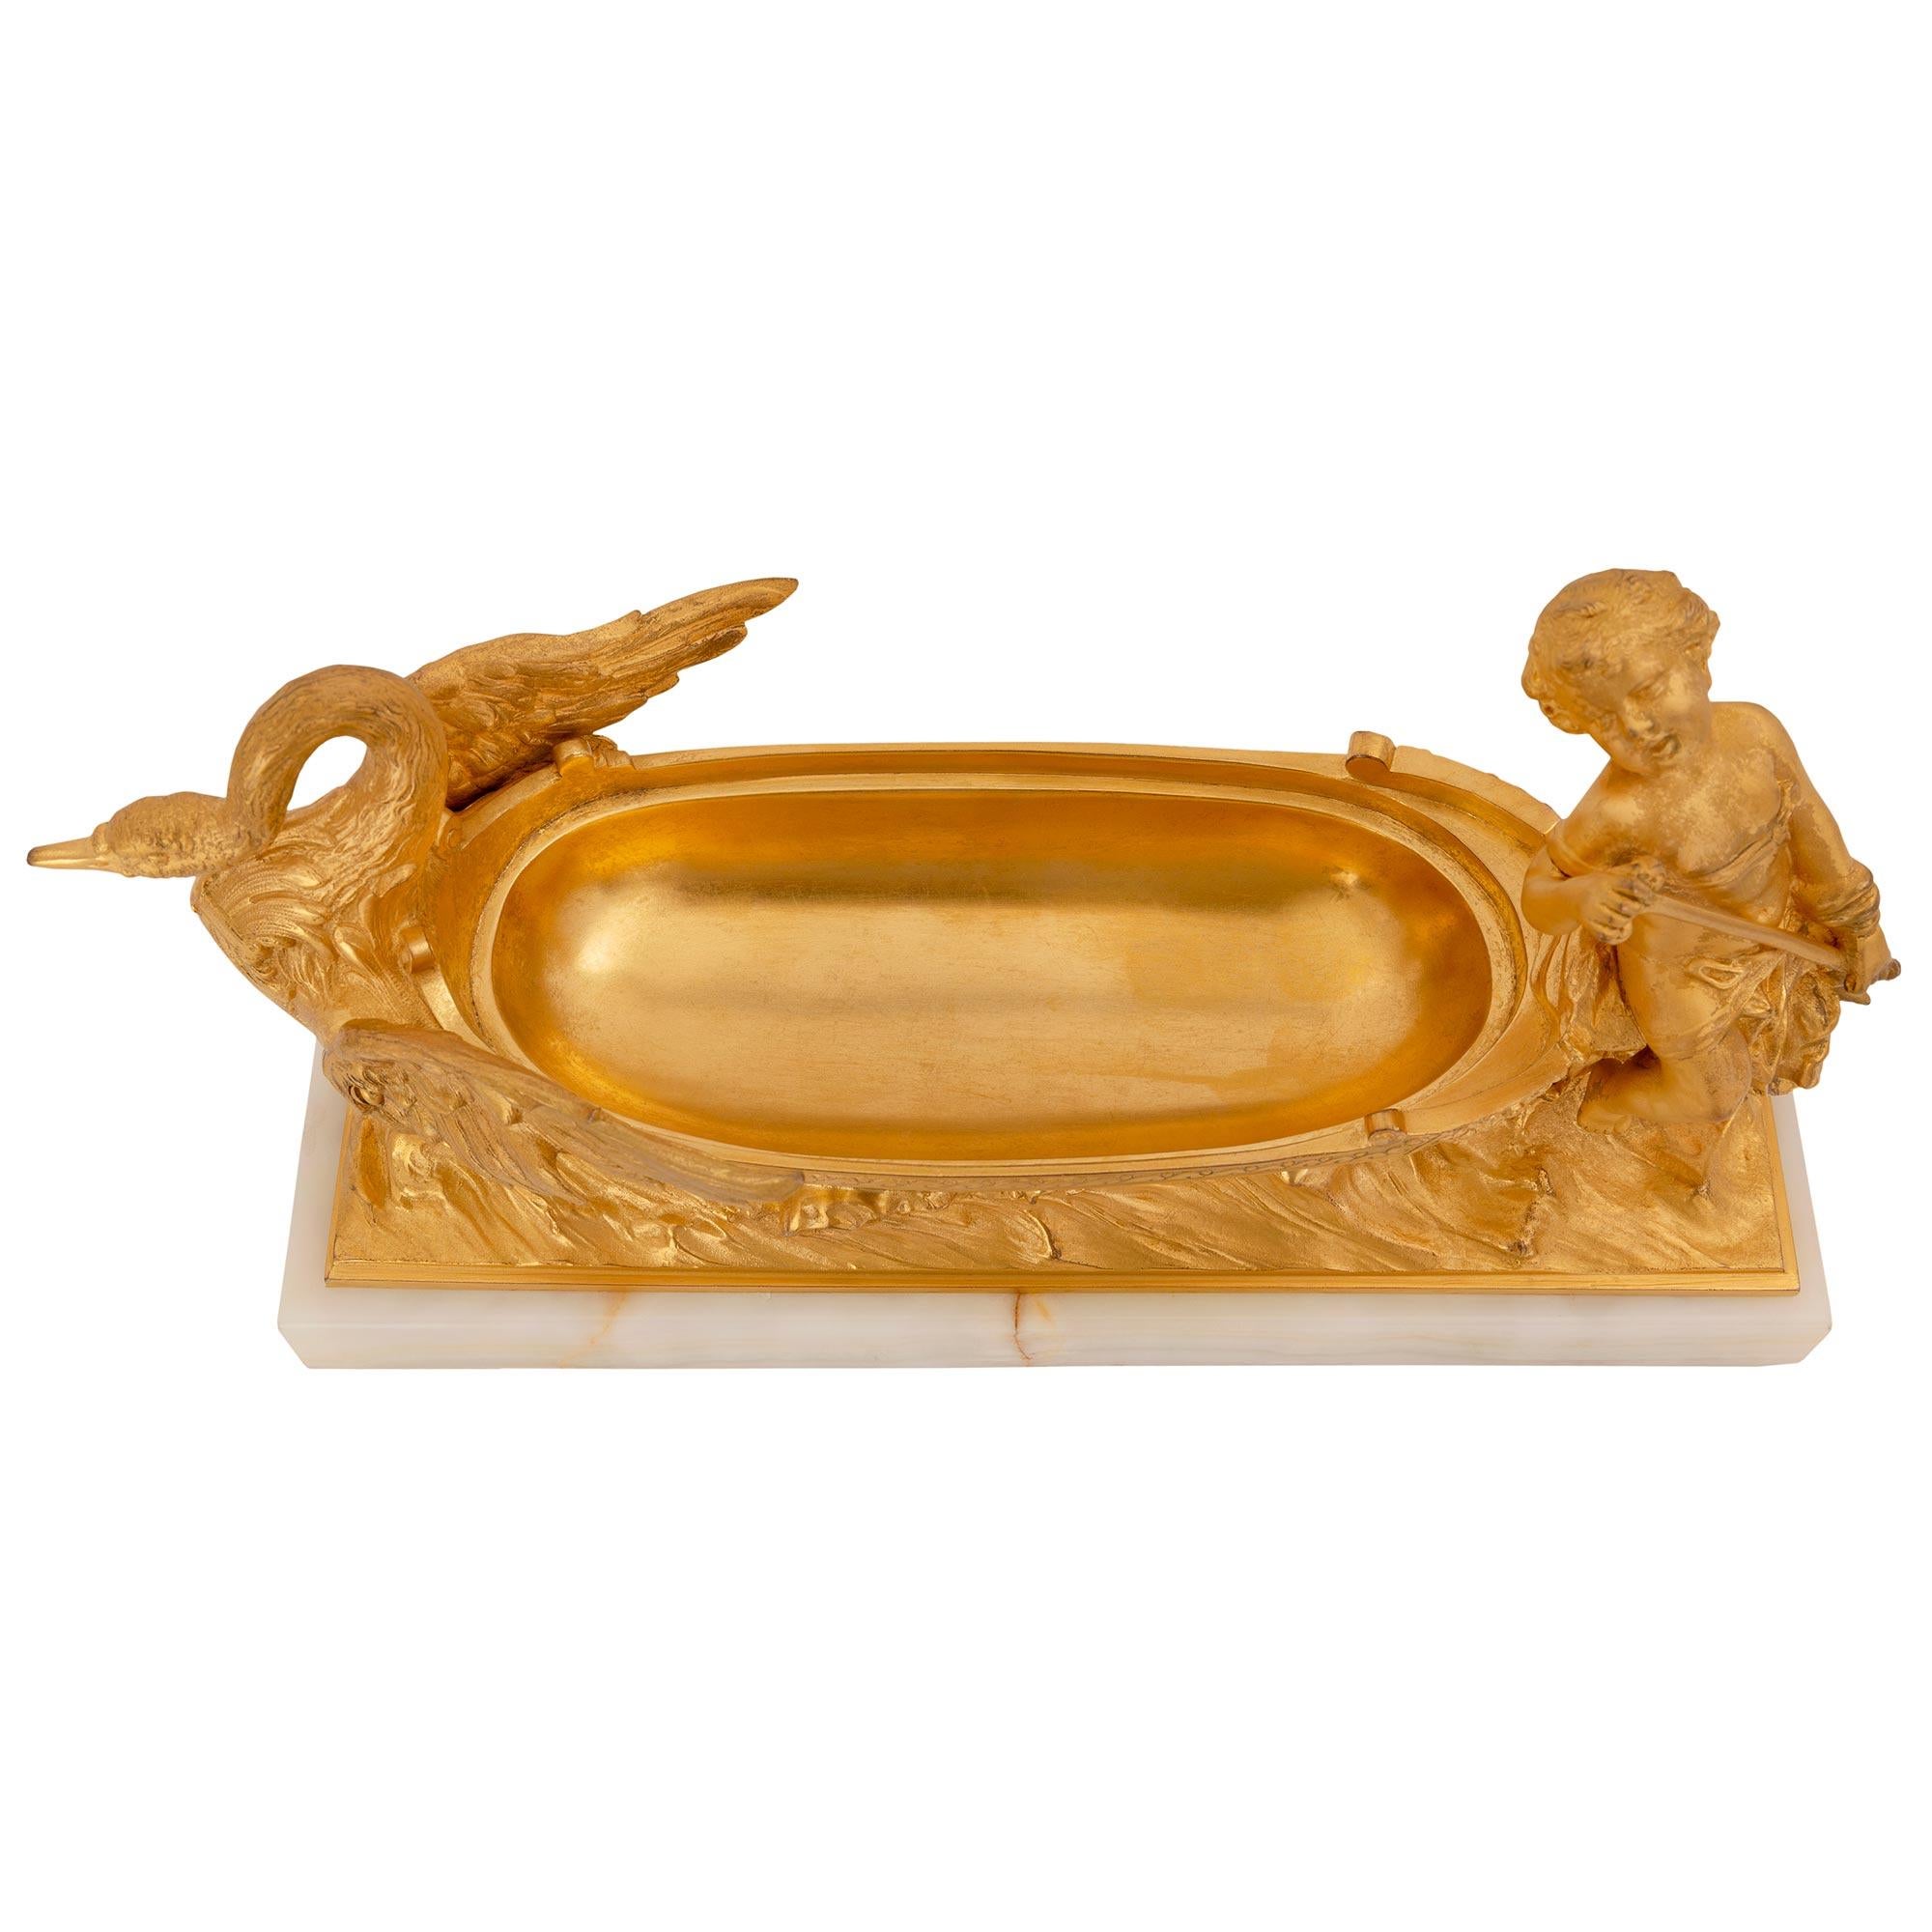 An elegant and high quality French 19th century Louis XVI st. ormolu and onyx cache pot/desk organizer/centerpiece. The centerpiece is raised its original rectangular onyx base showcasing the beautiful marble veins. Above is a most charming and